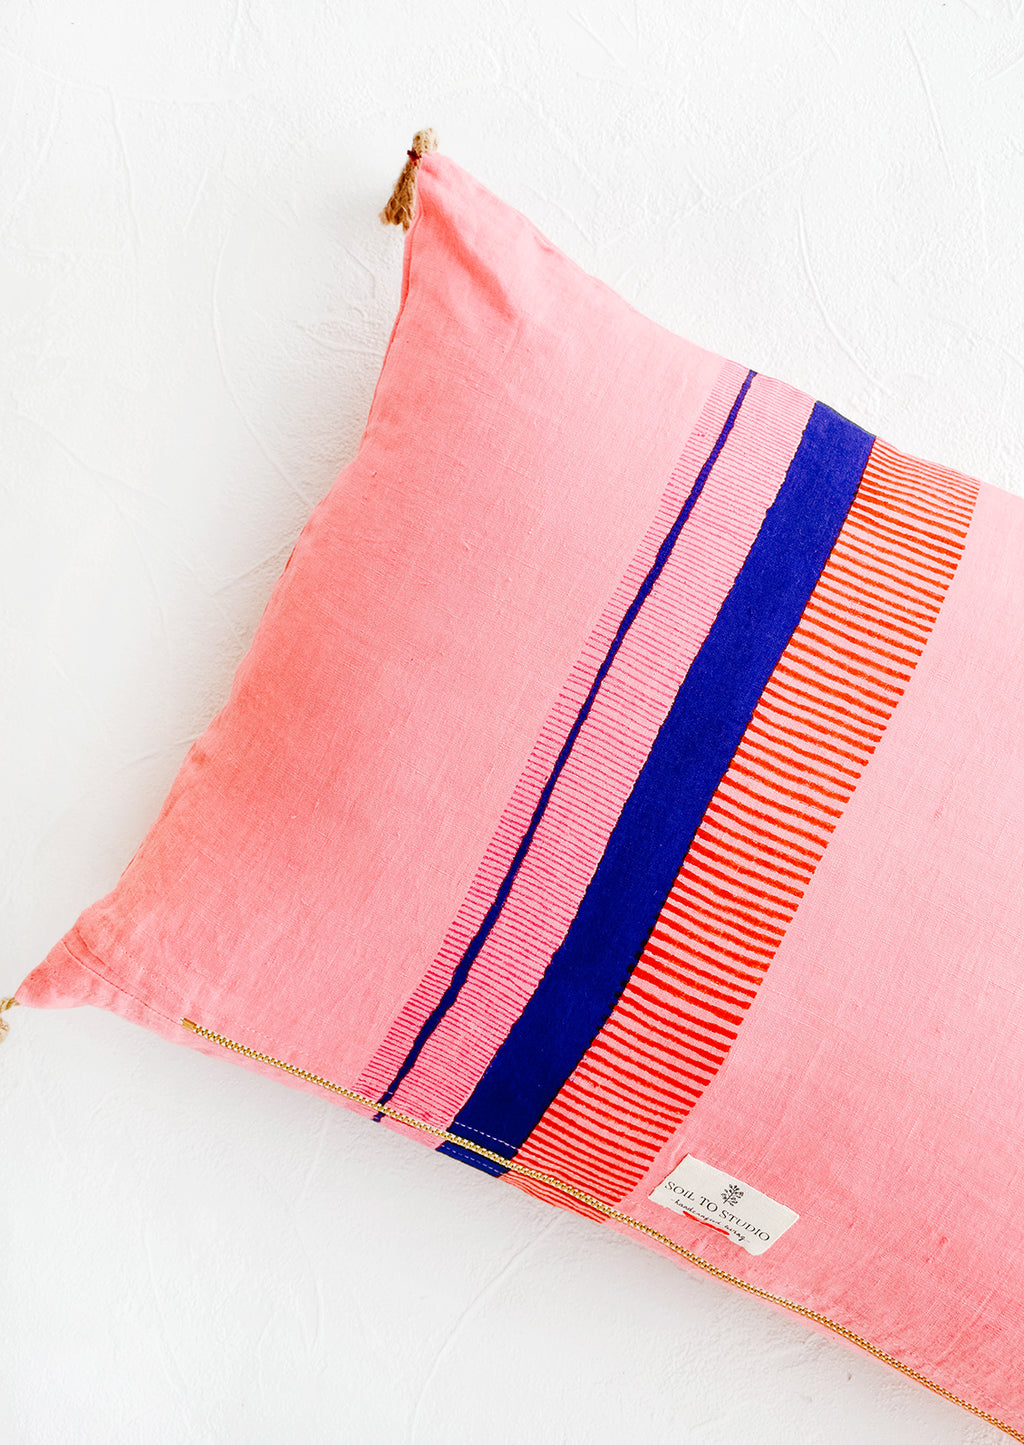 3: Backside of decorative pink linen throw pillow, block printed stripe detail and exposed metal zipper